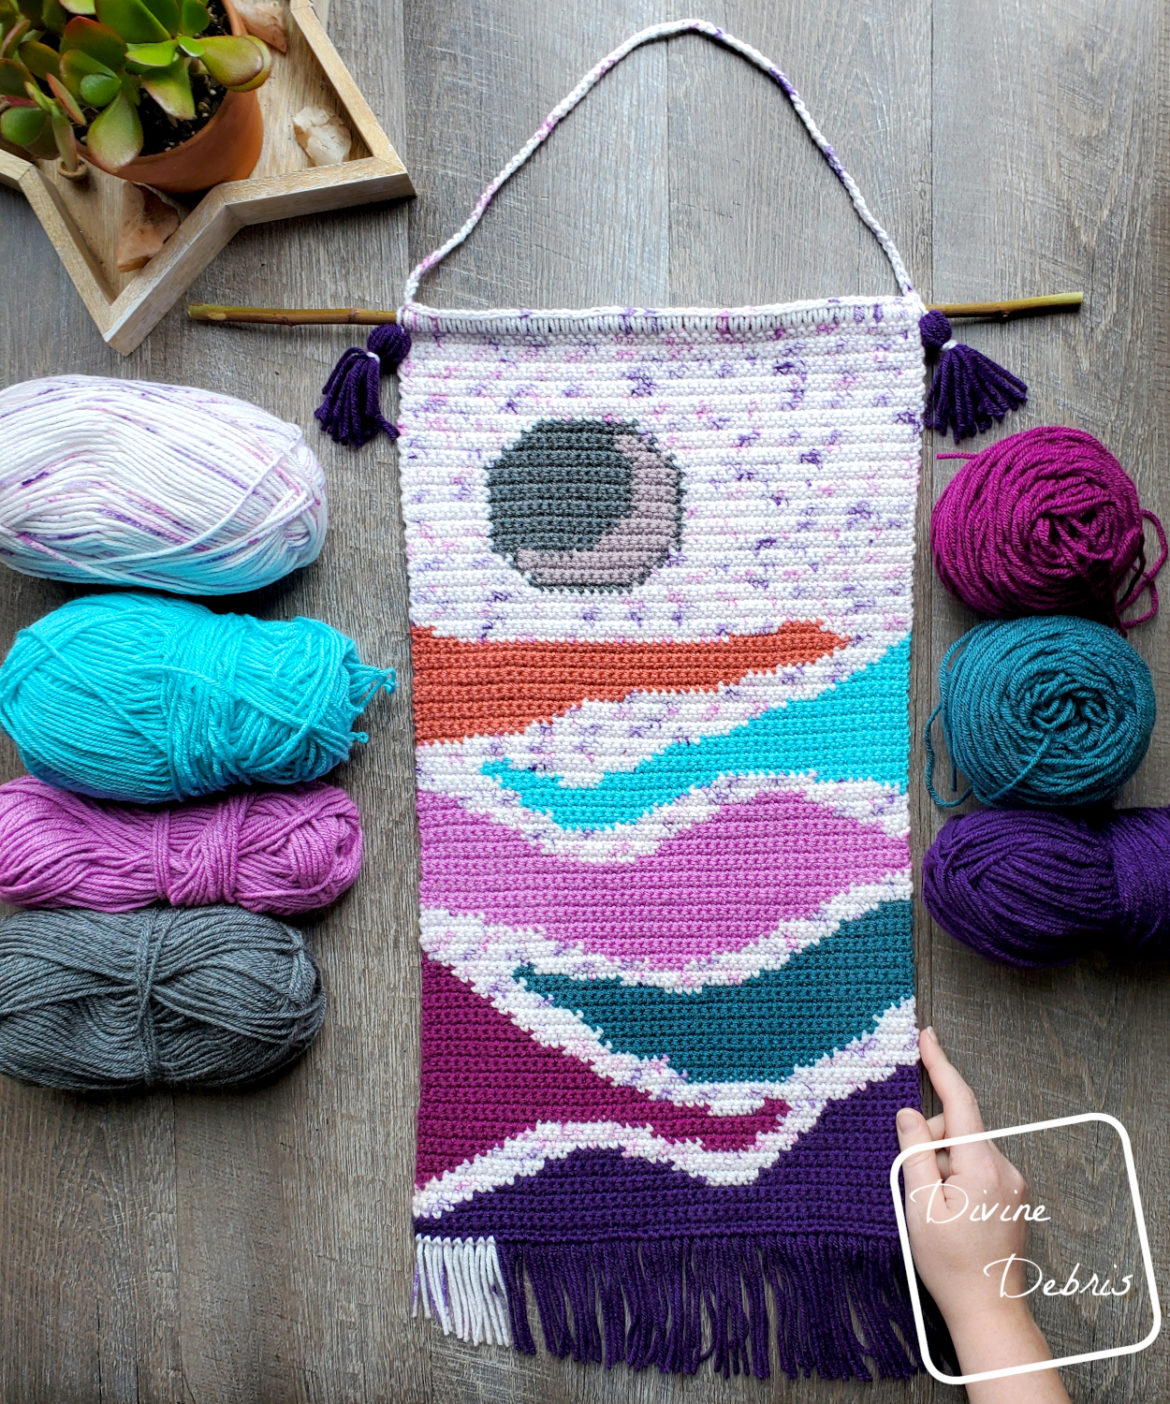 Make It Fancy With the Moon Rise Wall-Hanging free crochet pattern